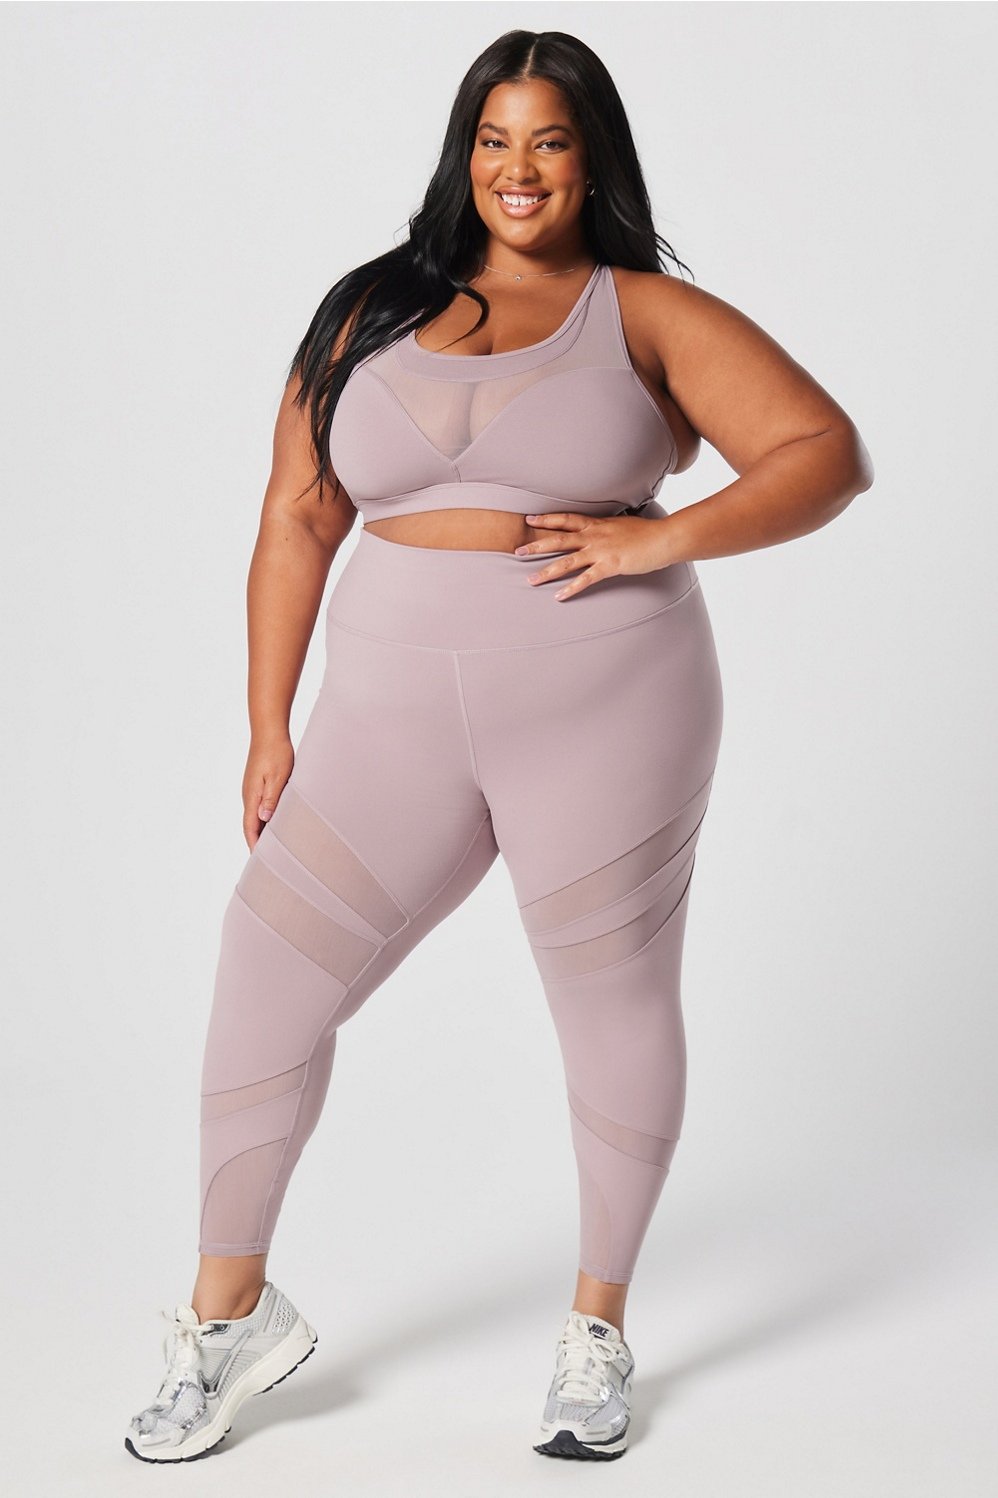 High-Waisted Wrapping Mesh Paneled 7/8 Legging - Fabletics